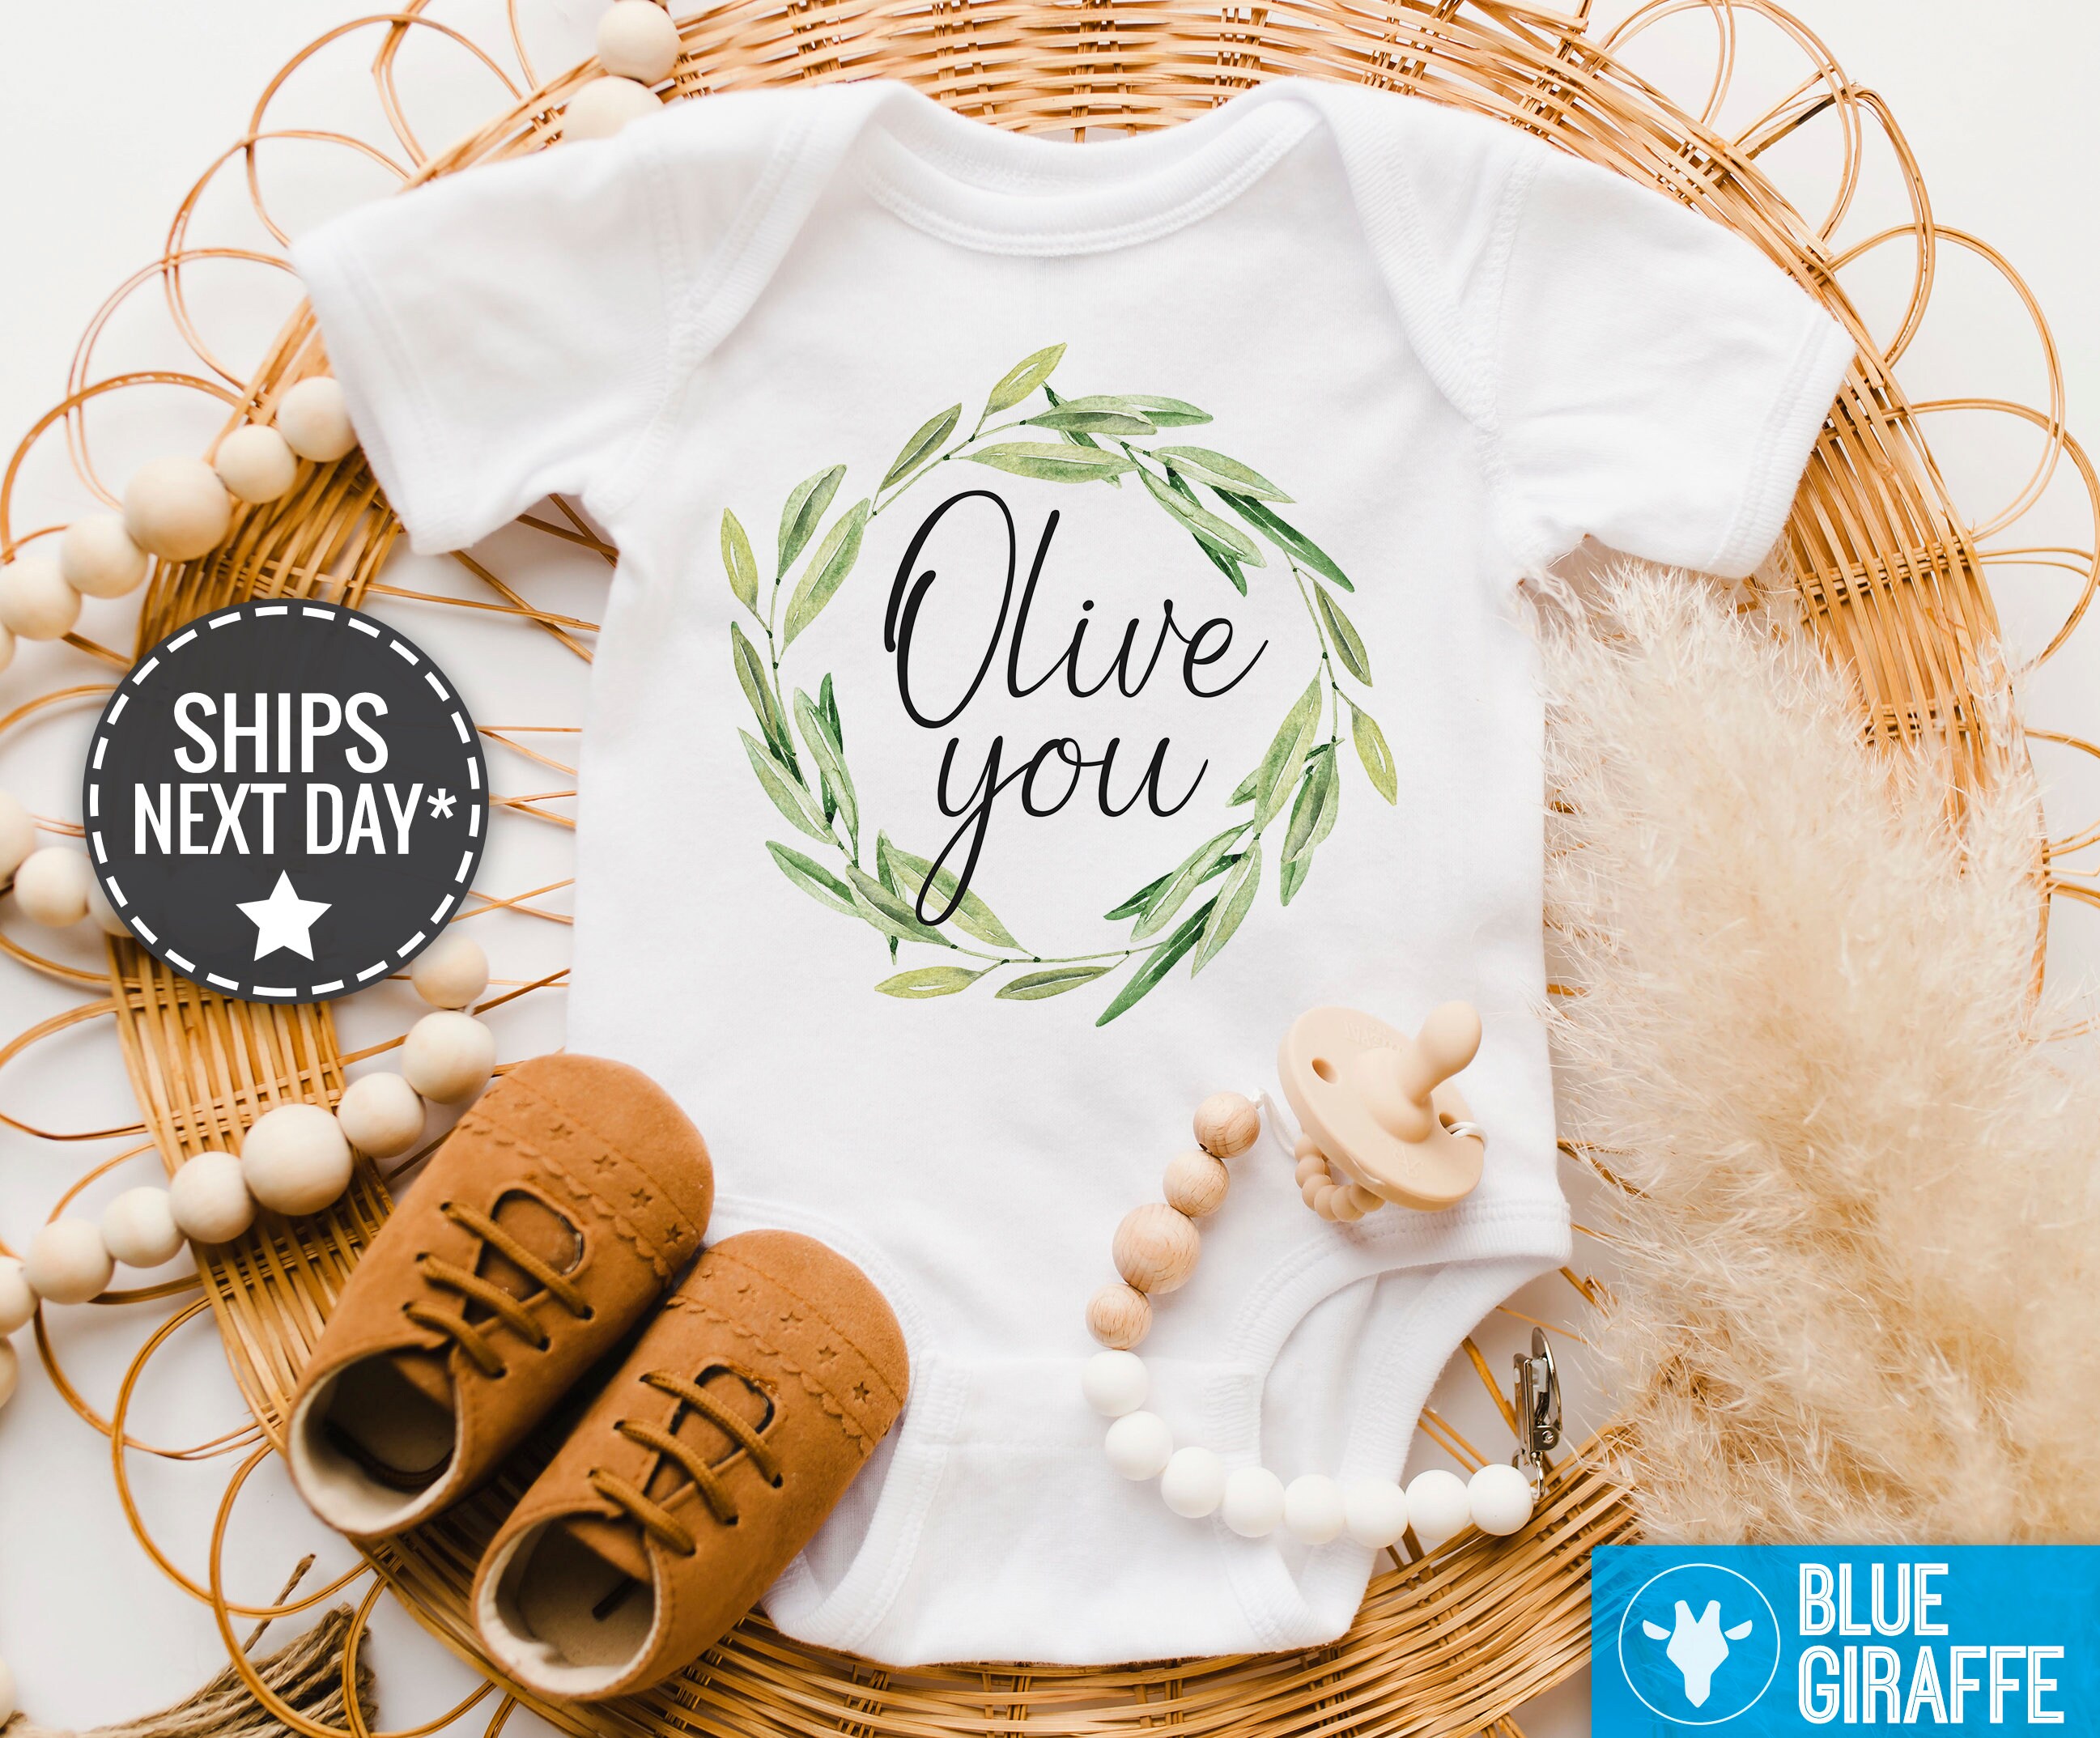 Pin by Olive on BAIRNS  Baby boy fashion, Baby boy outfits, Baby fashion